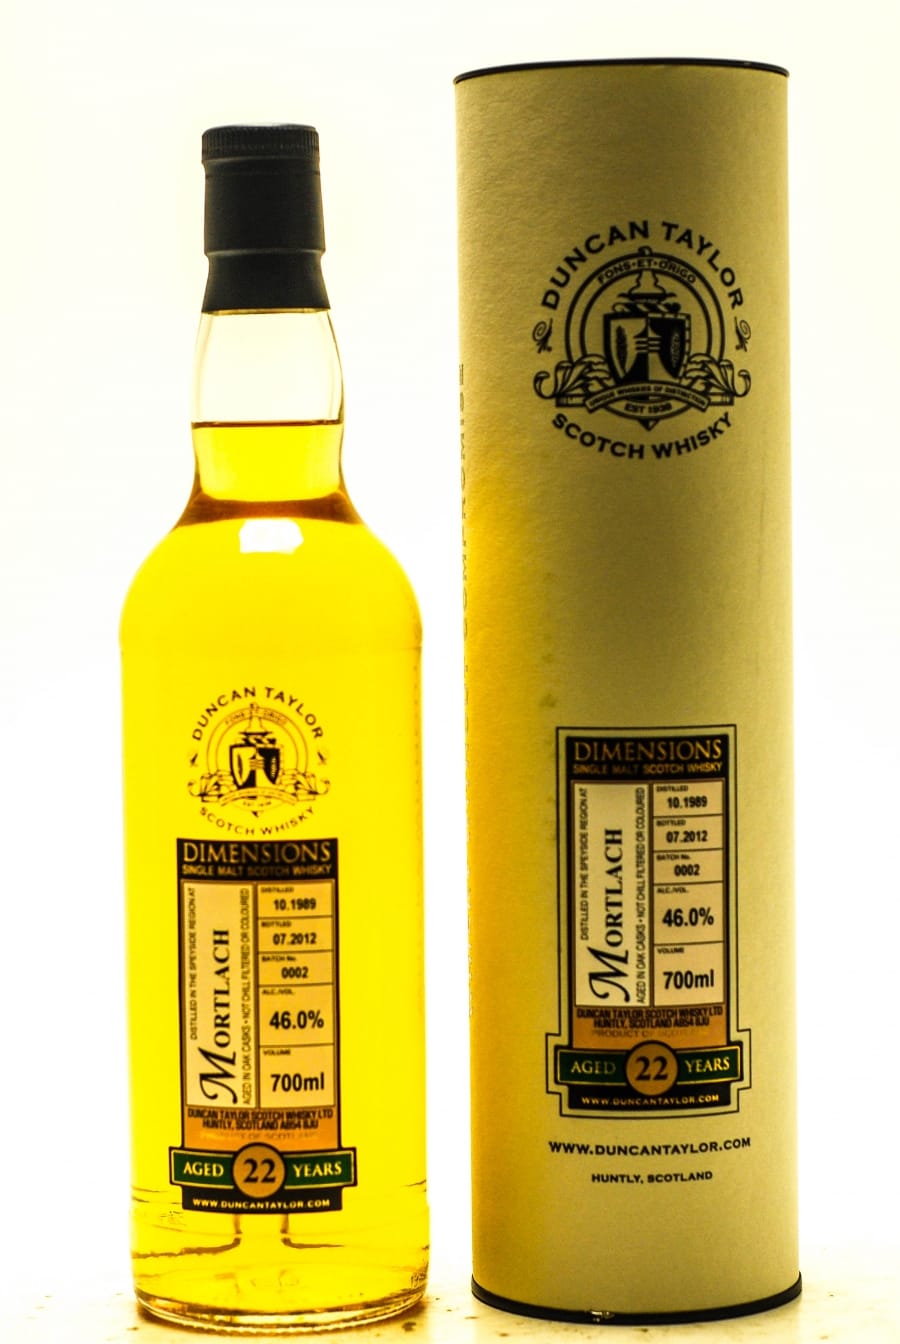 Mortlach - 22 Years Old Dimensions Duncan Taylor Batch 2 46% 1989